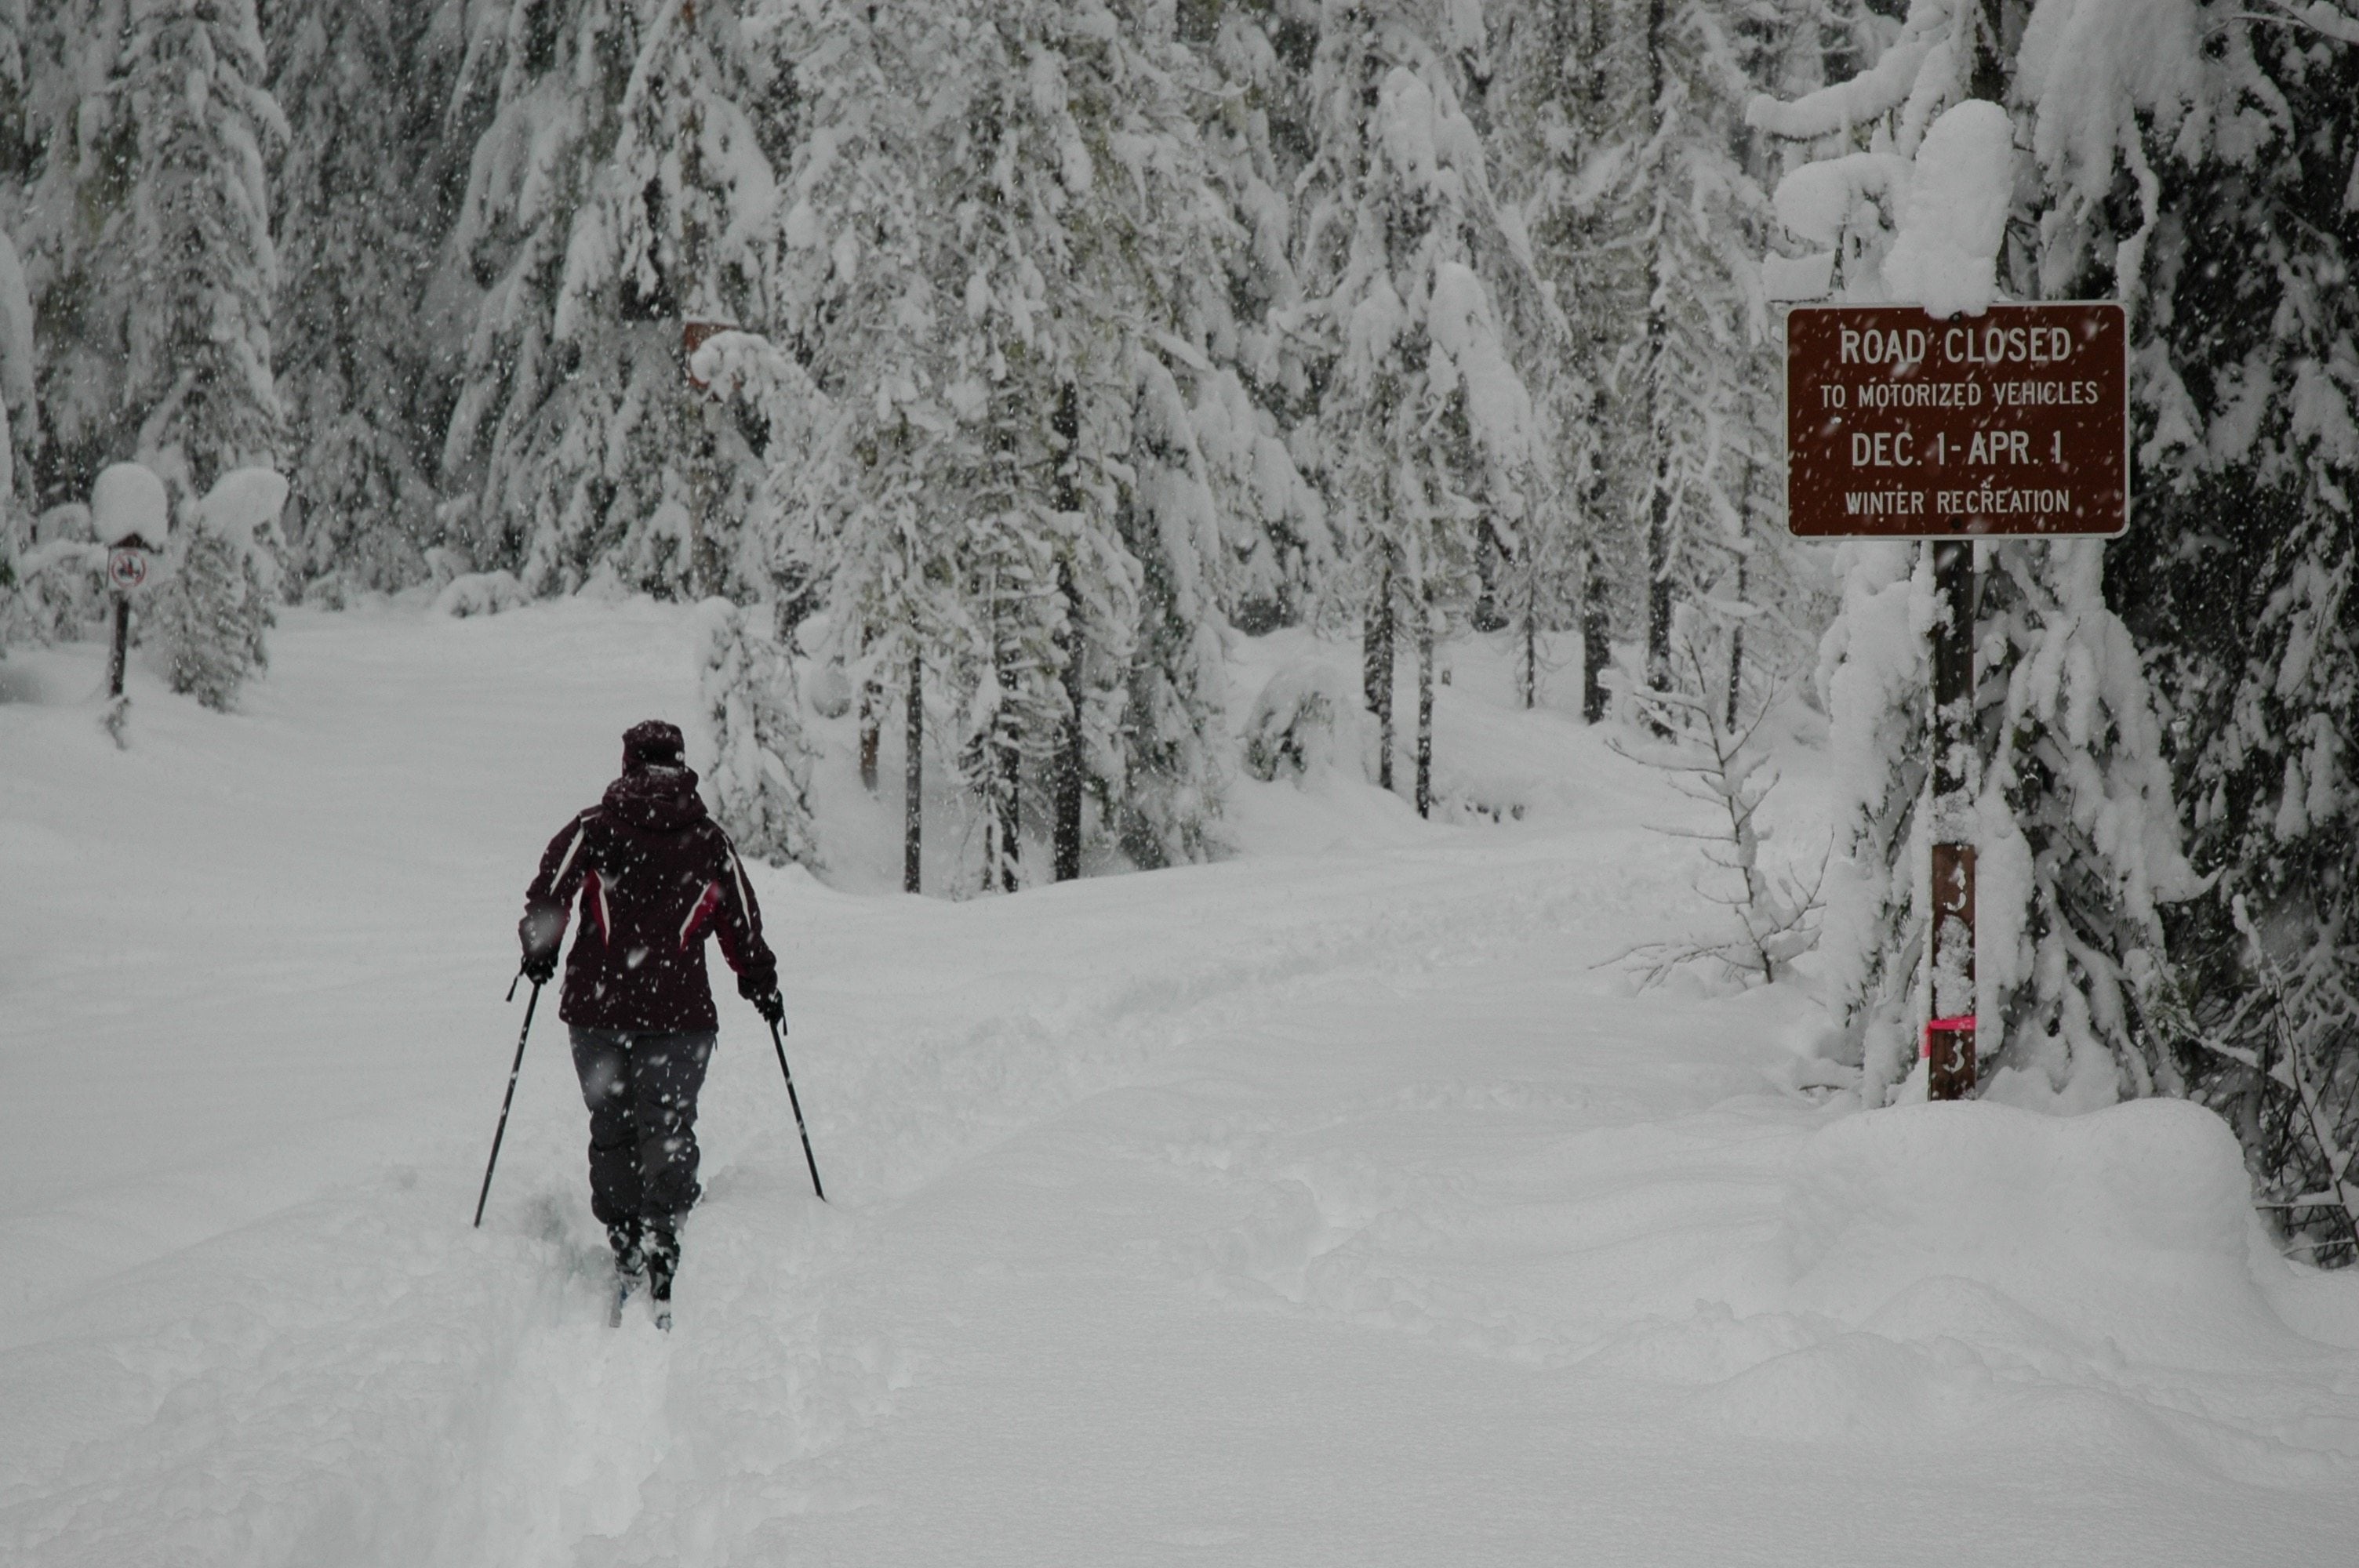 Most backcountry areas in the southern Gifford Pinchot National Forest got 18 to 24 inches of new snow in the past week.